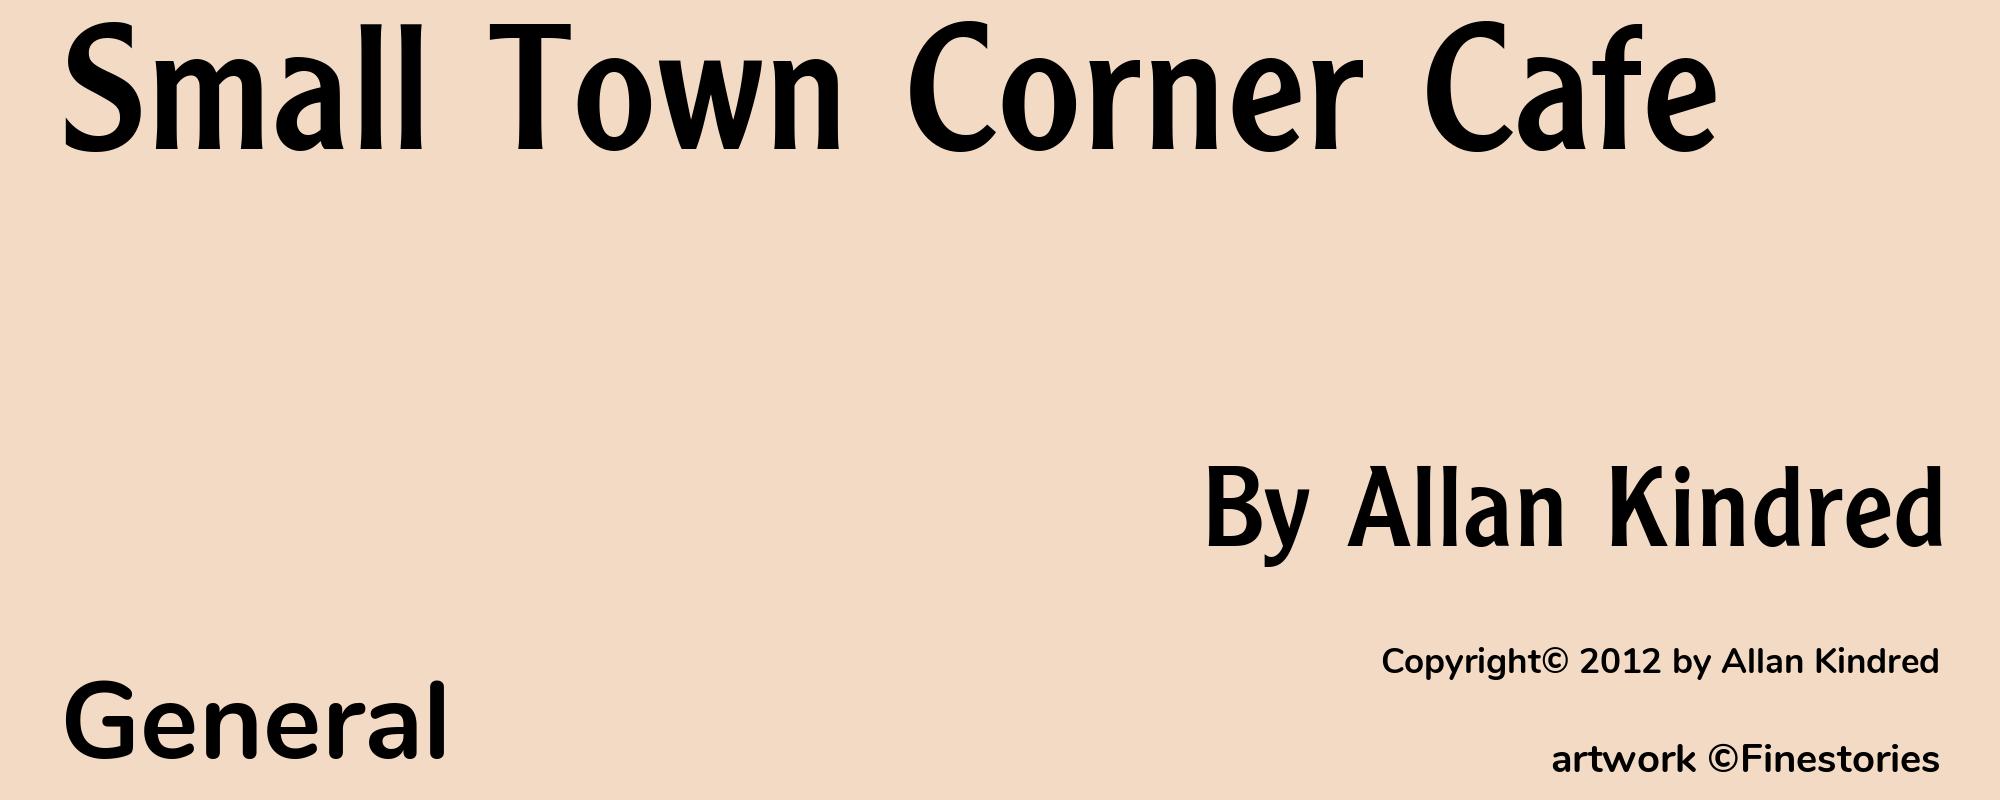 Small Town Corner Cafe - Cover